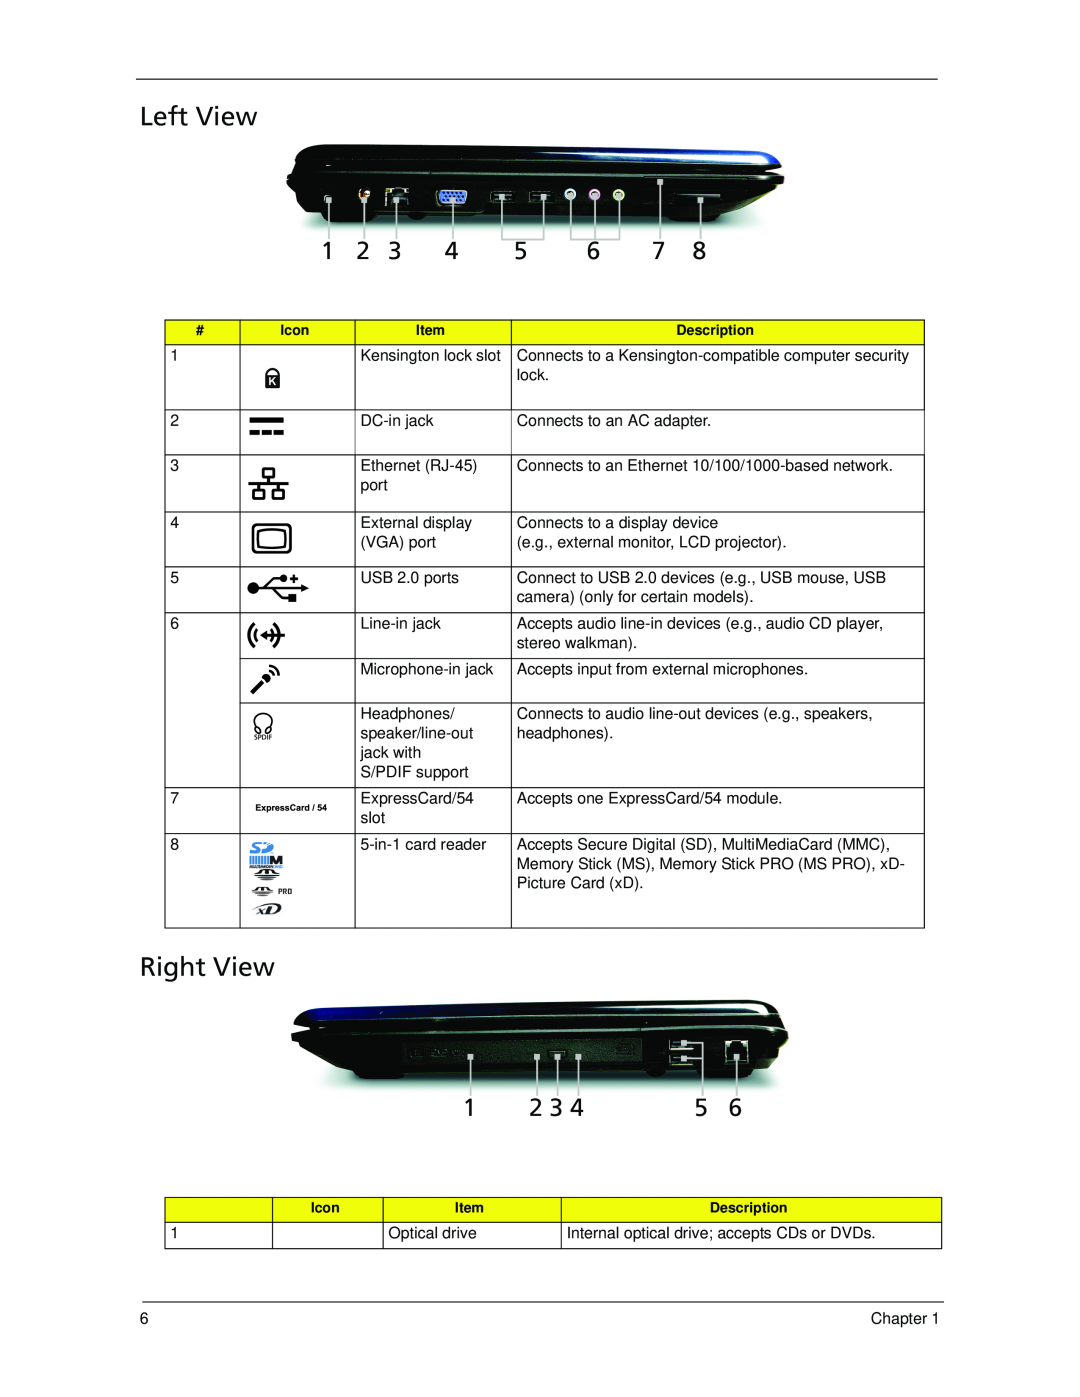 Acer 5330 manual Left View, Right View, Optical drive 